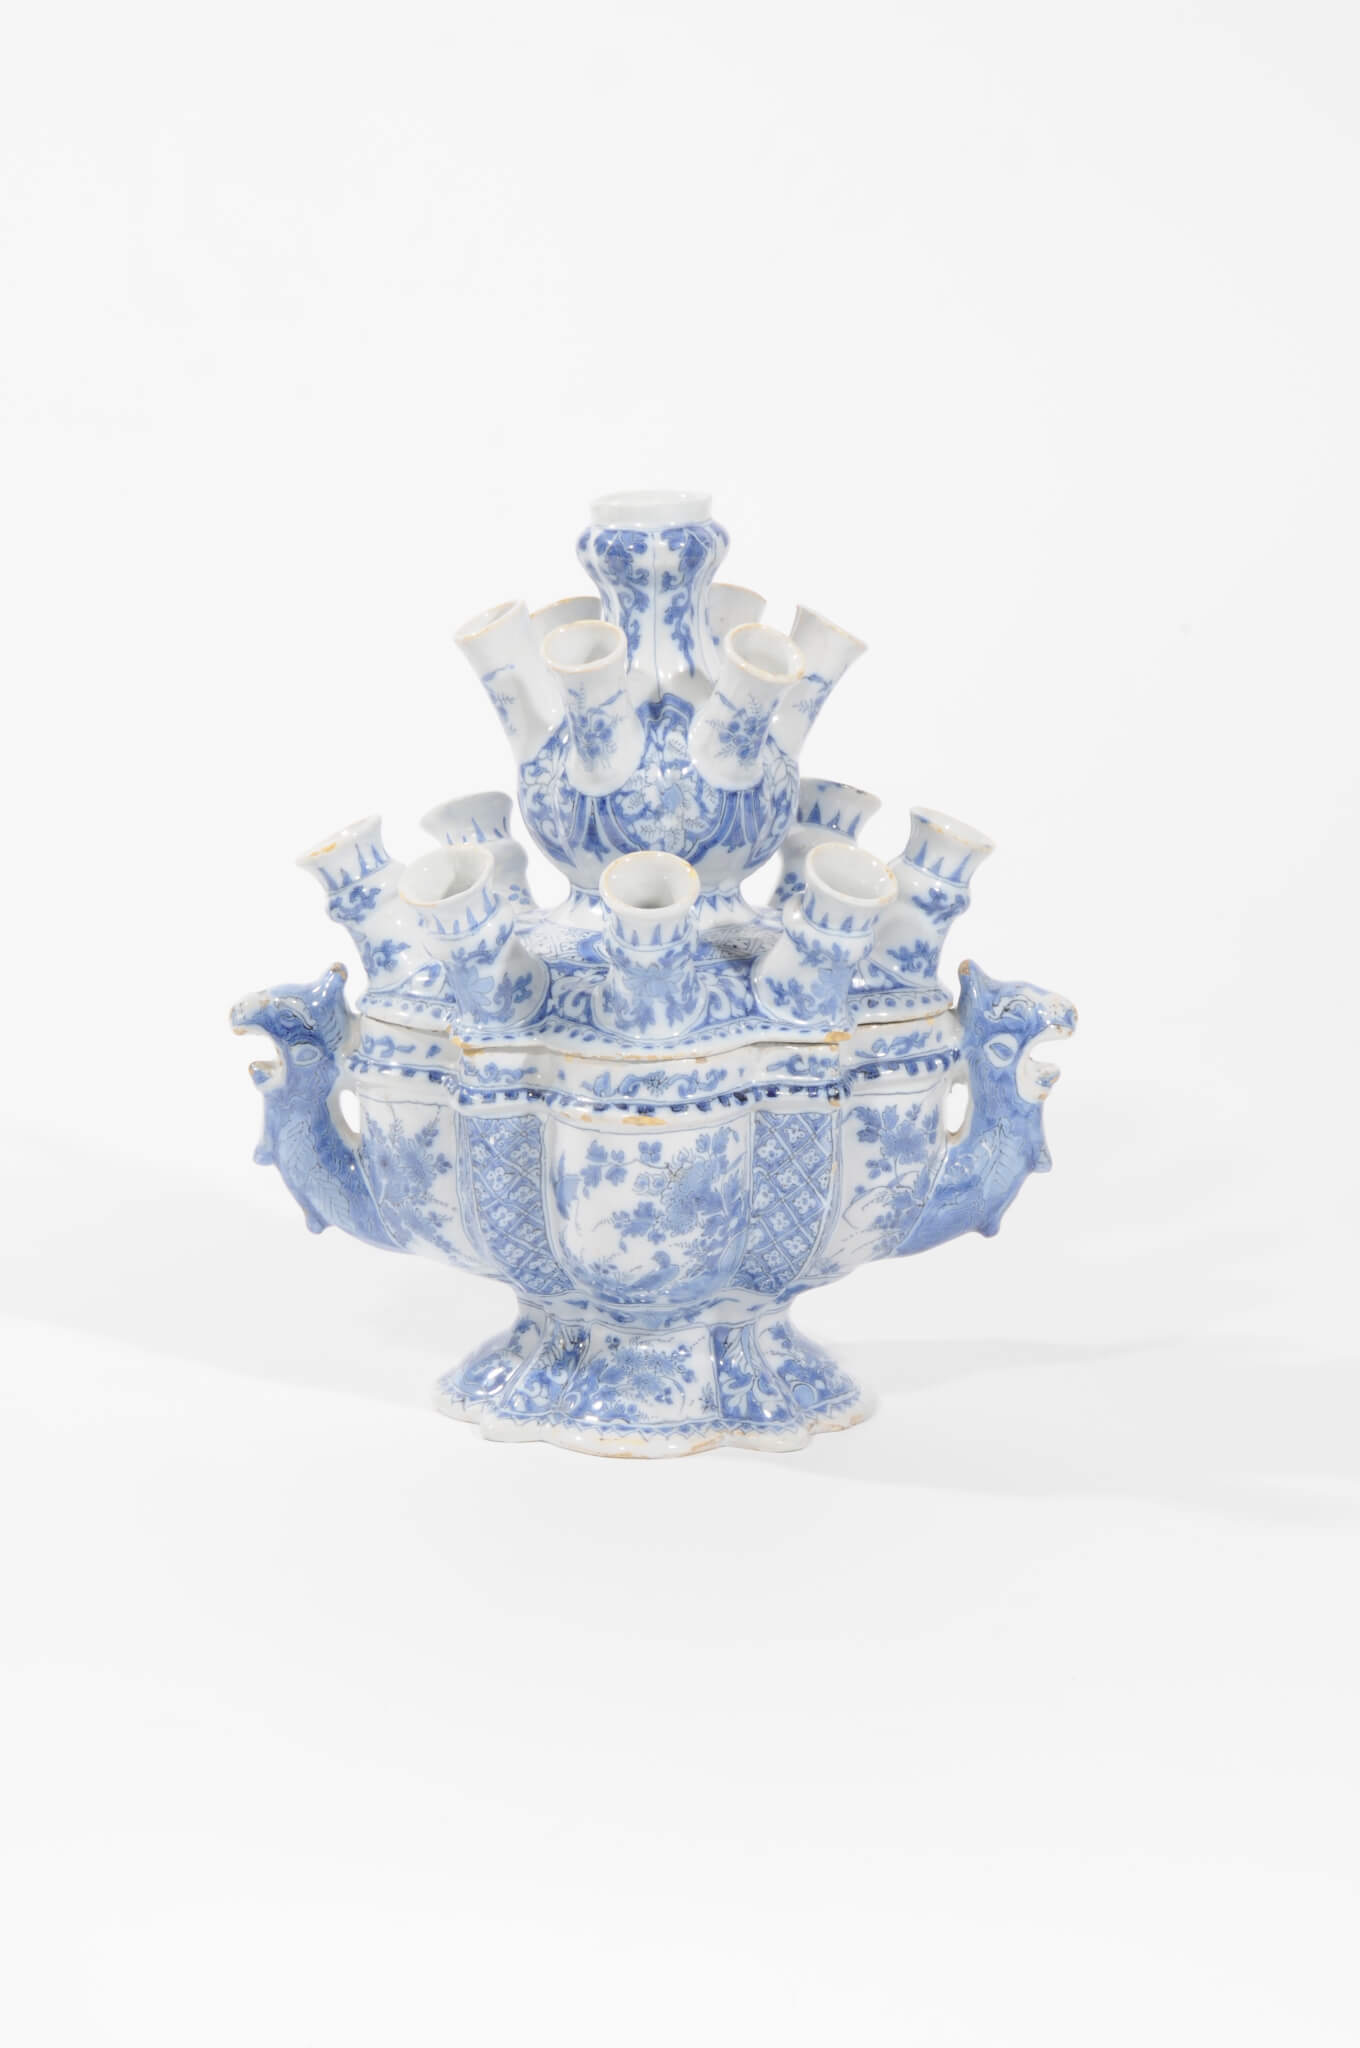 •D1033. Blue and White Flower Bowl and Cover with Spouts